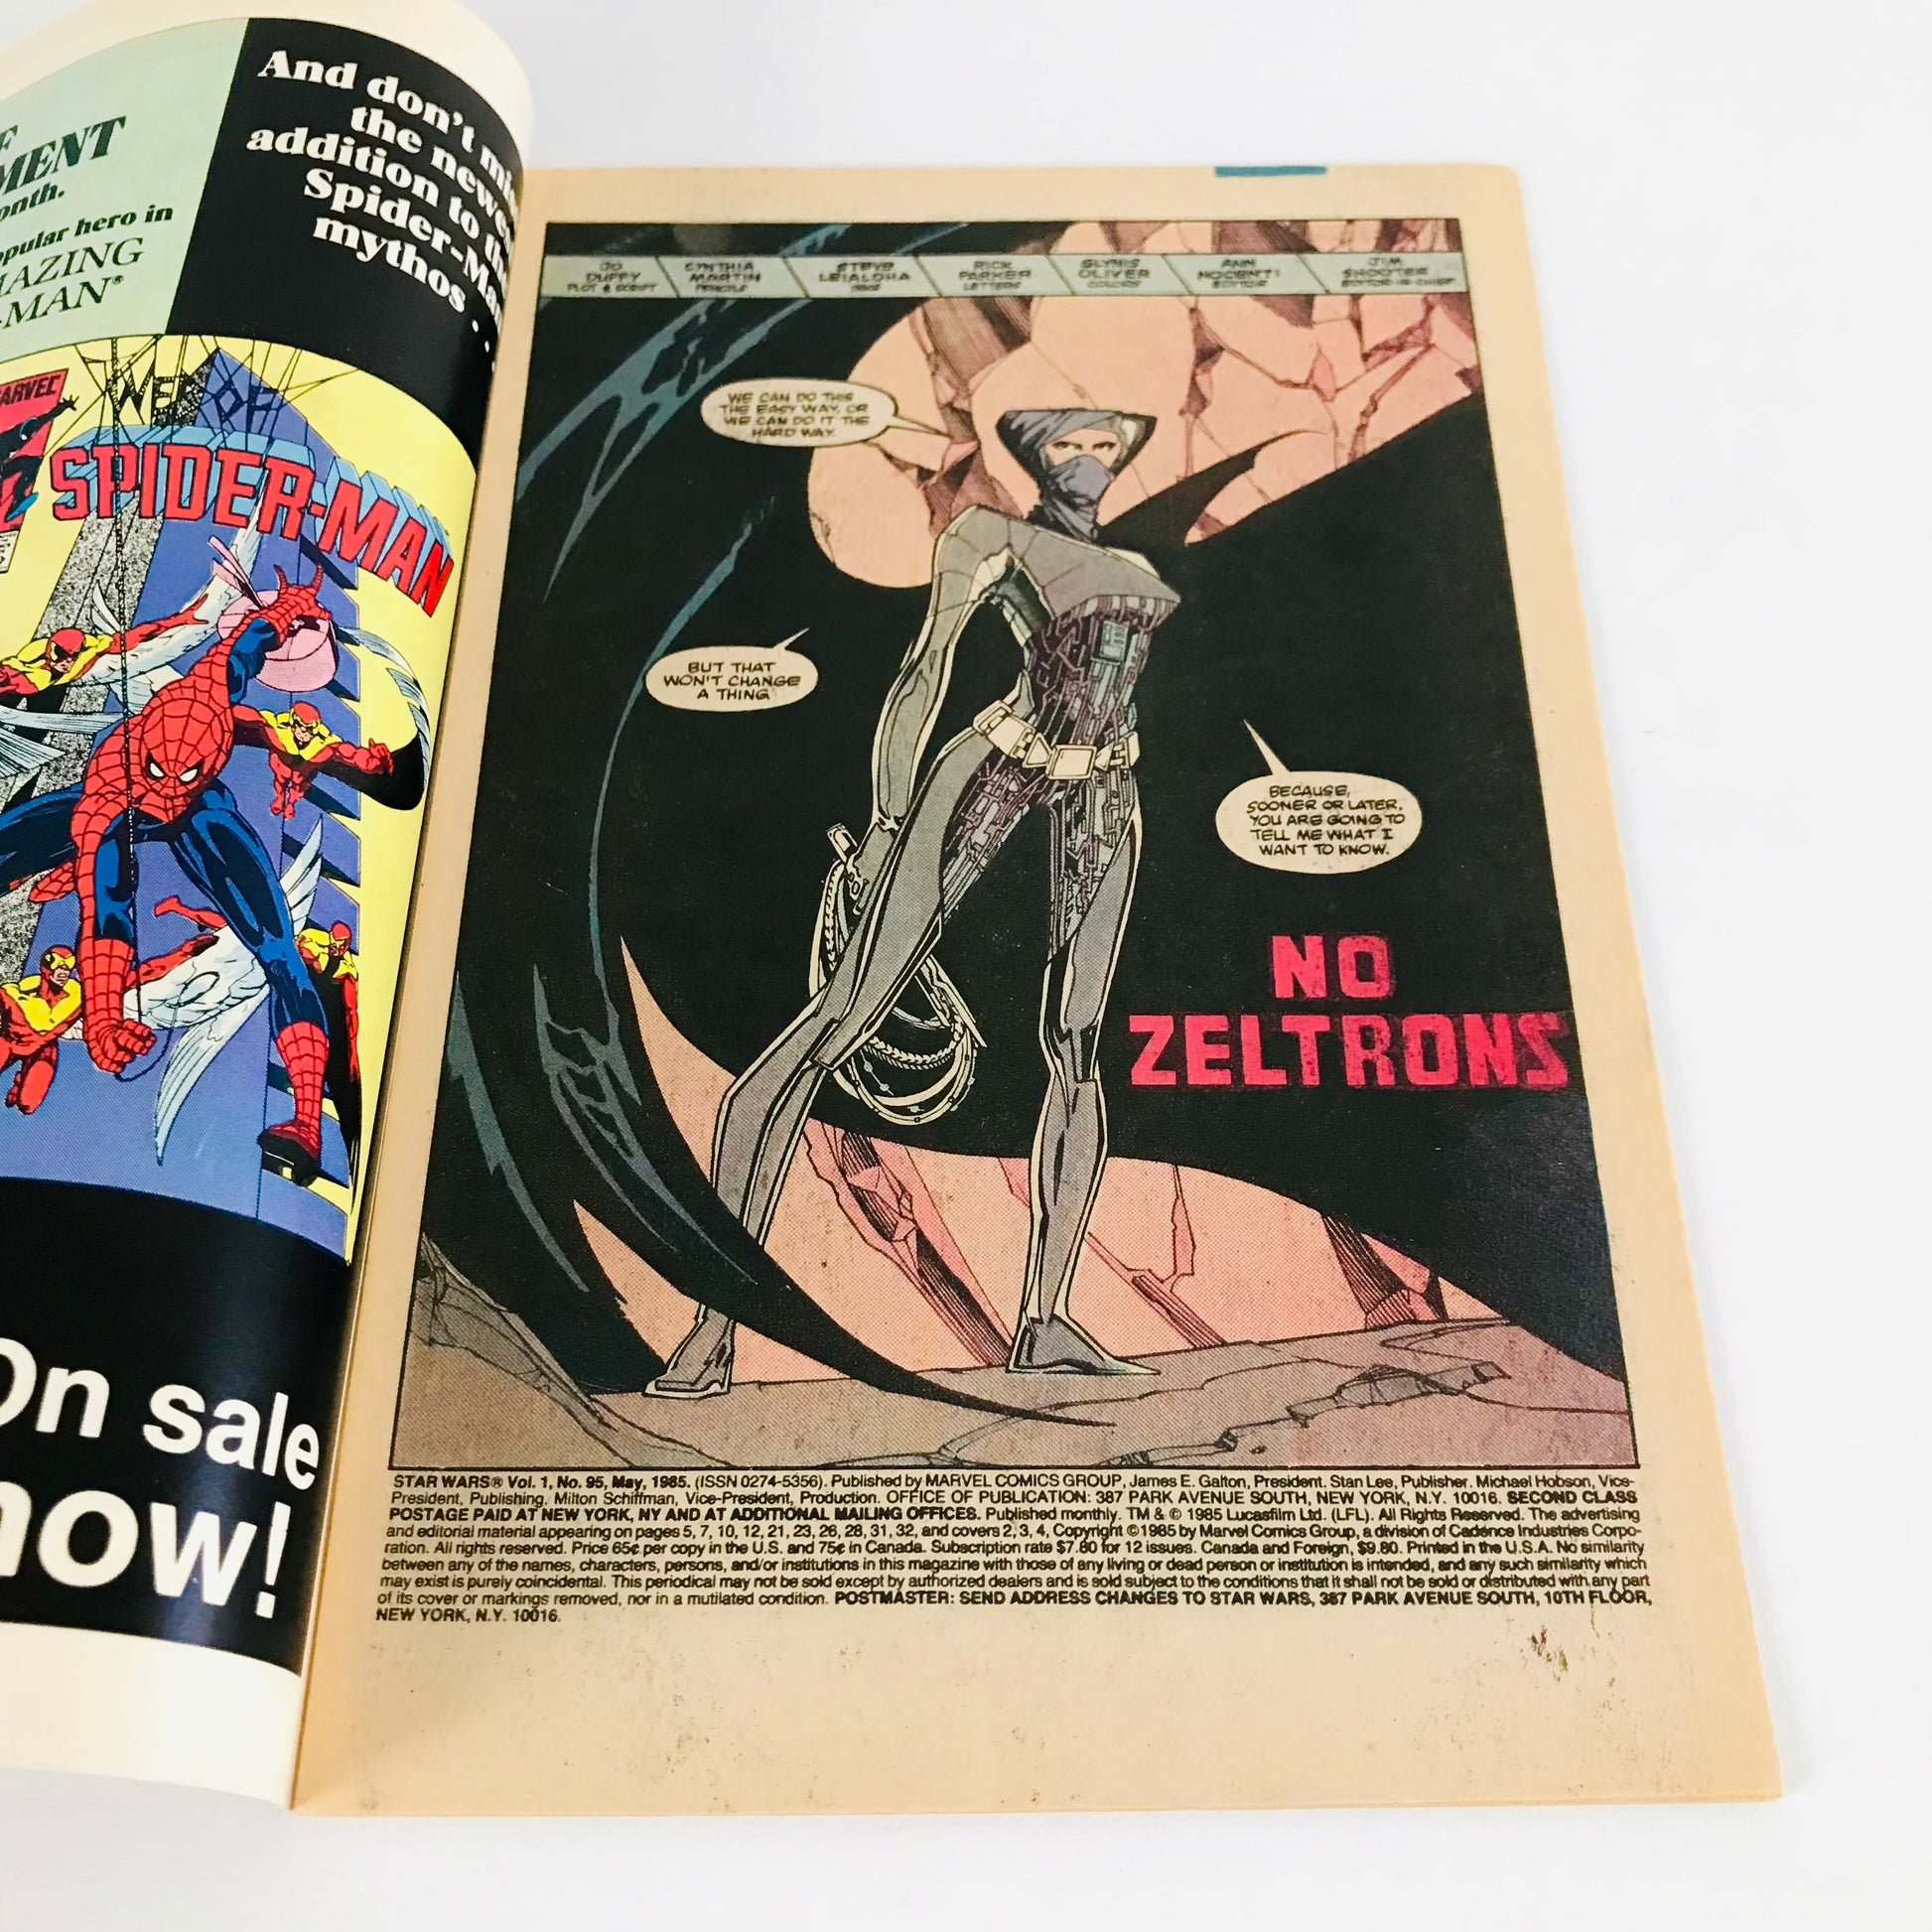 Title page from a 1980s Star Wars comic book showing Dark Lady Lumiya with the text "No Zeltrons".